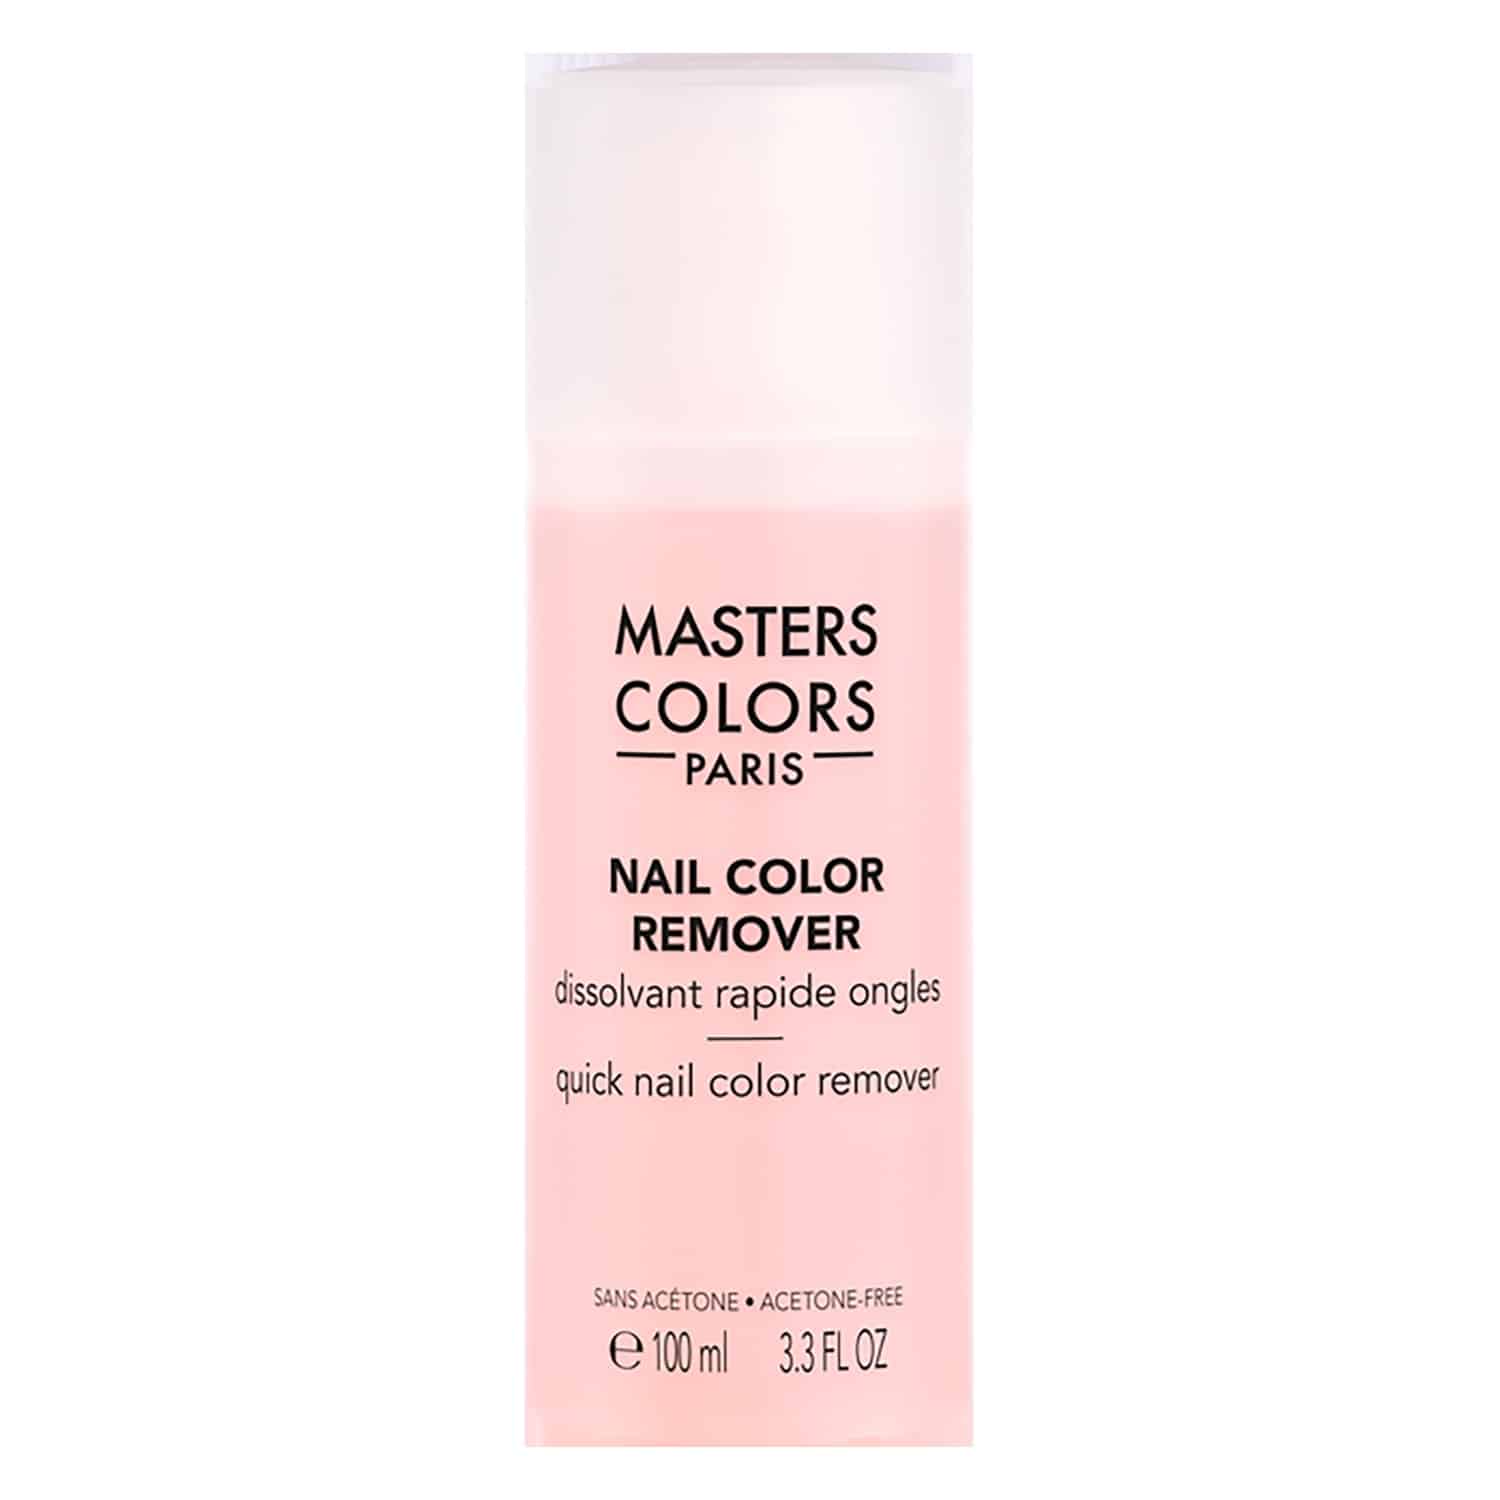 masters-colors-nail-color-remover